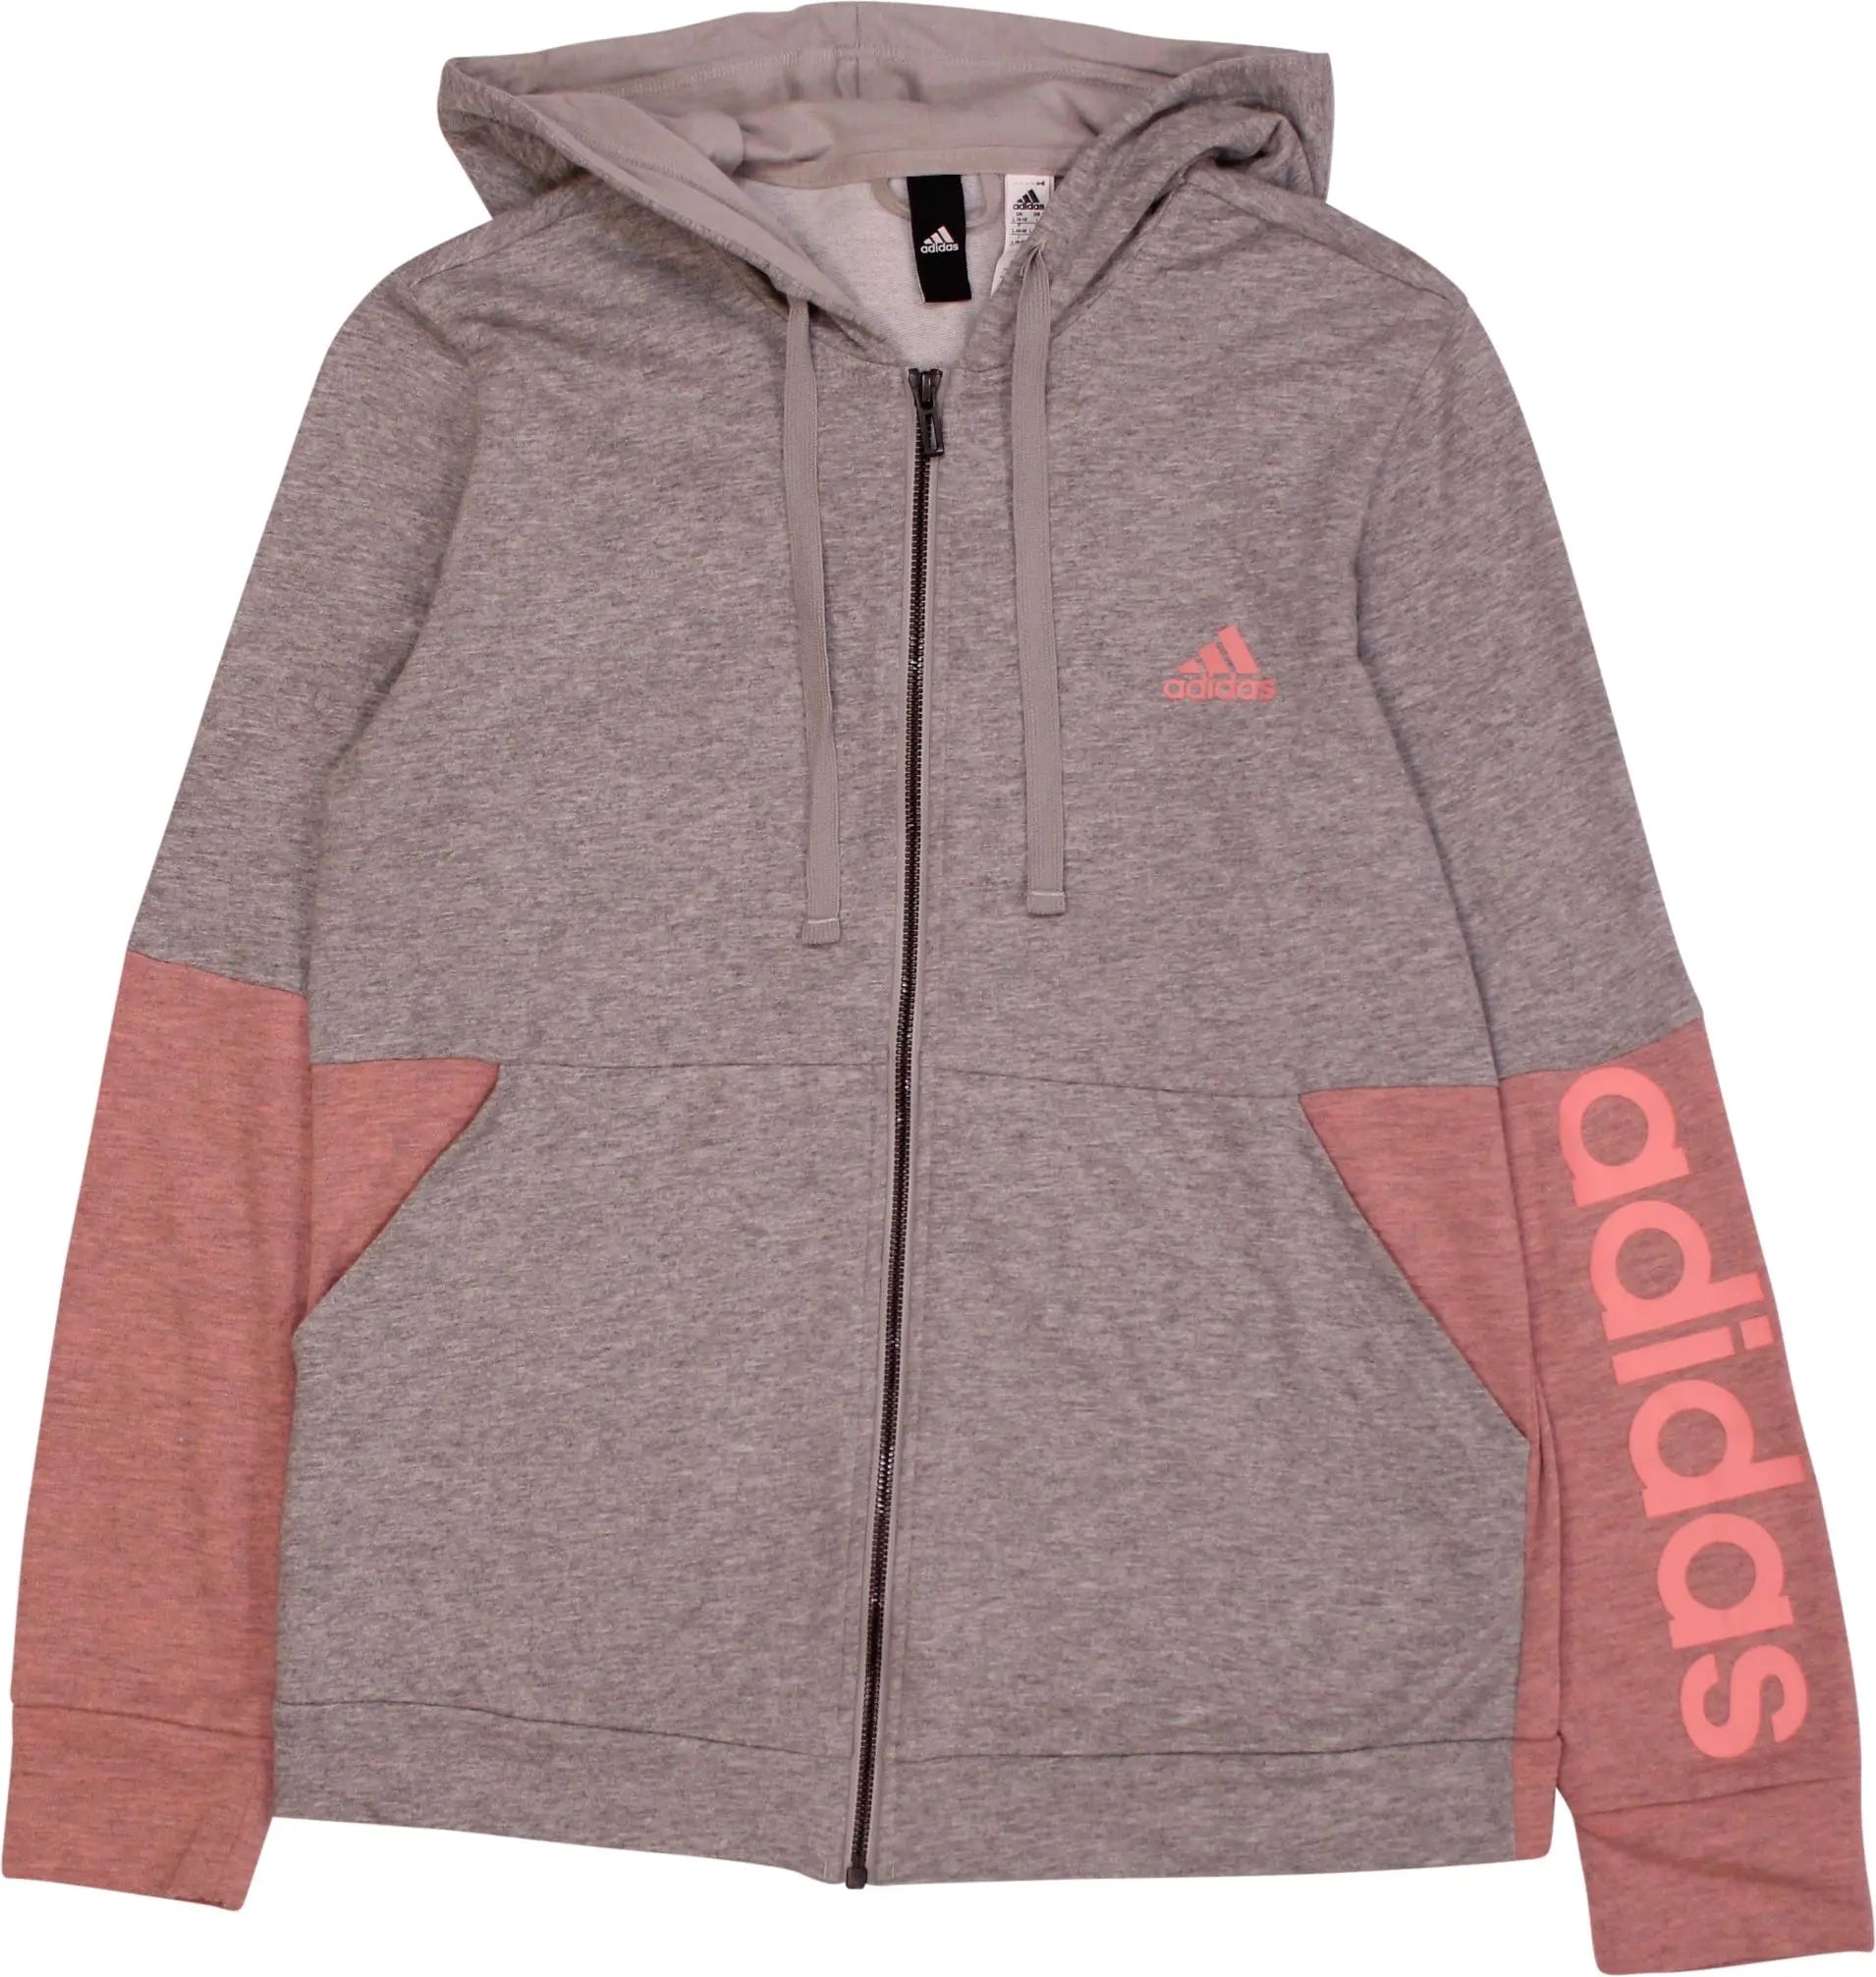 Adidas - Hoodie with Zipper by Adidas- ThriftTale.com - Vintage and second handclothing